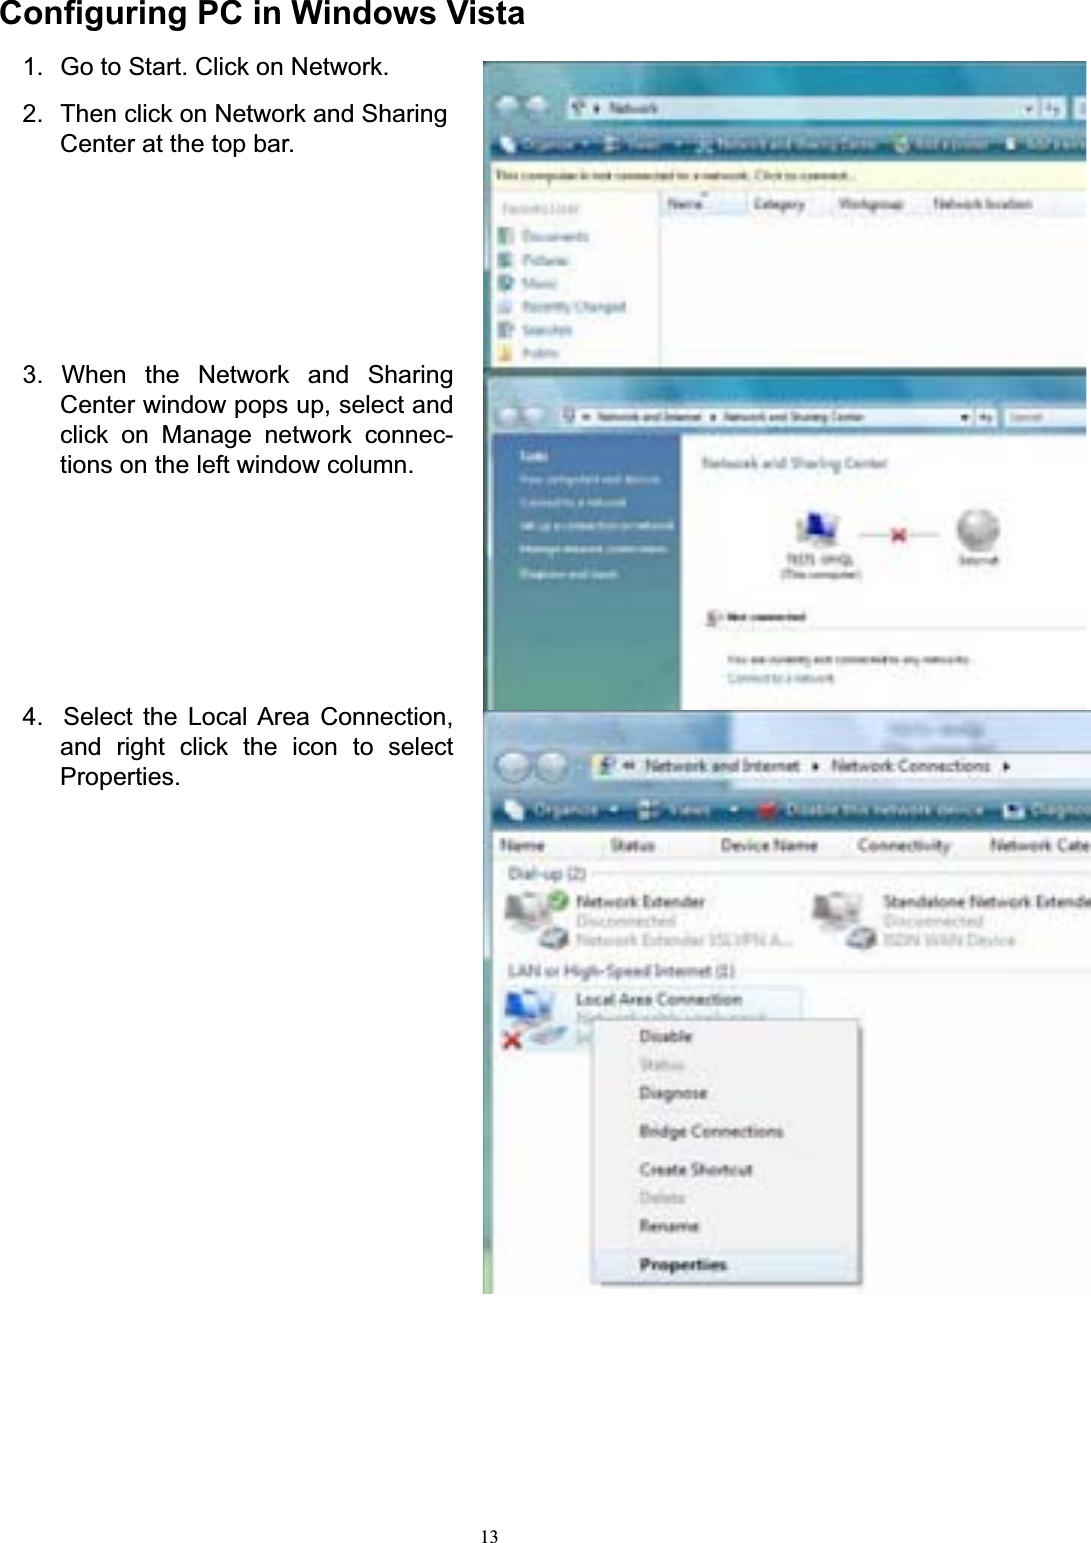 13Configuring PC in Windows Vista1.  Go to Start. Click on Network. 2.  Then click on Network and Sharing Center at the top bar. 3. When the Network and Sharing Center window pops up, select and click on Manage network connec- tions on the left window column. 4.  Select the Local Area Connection, and right click the icon to select Properties.